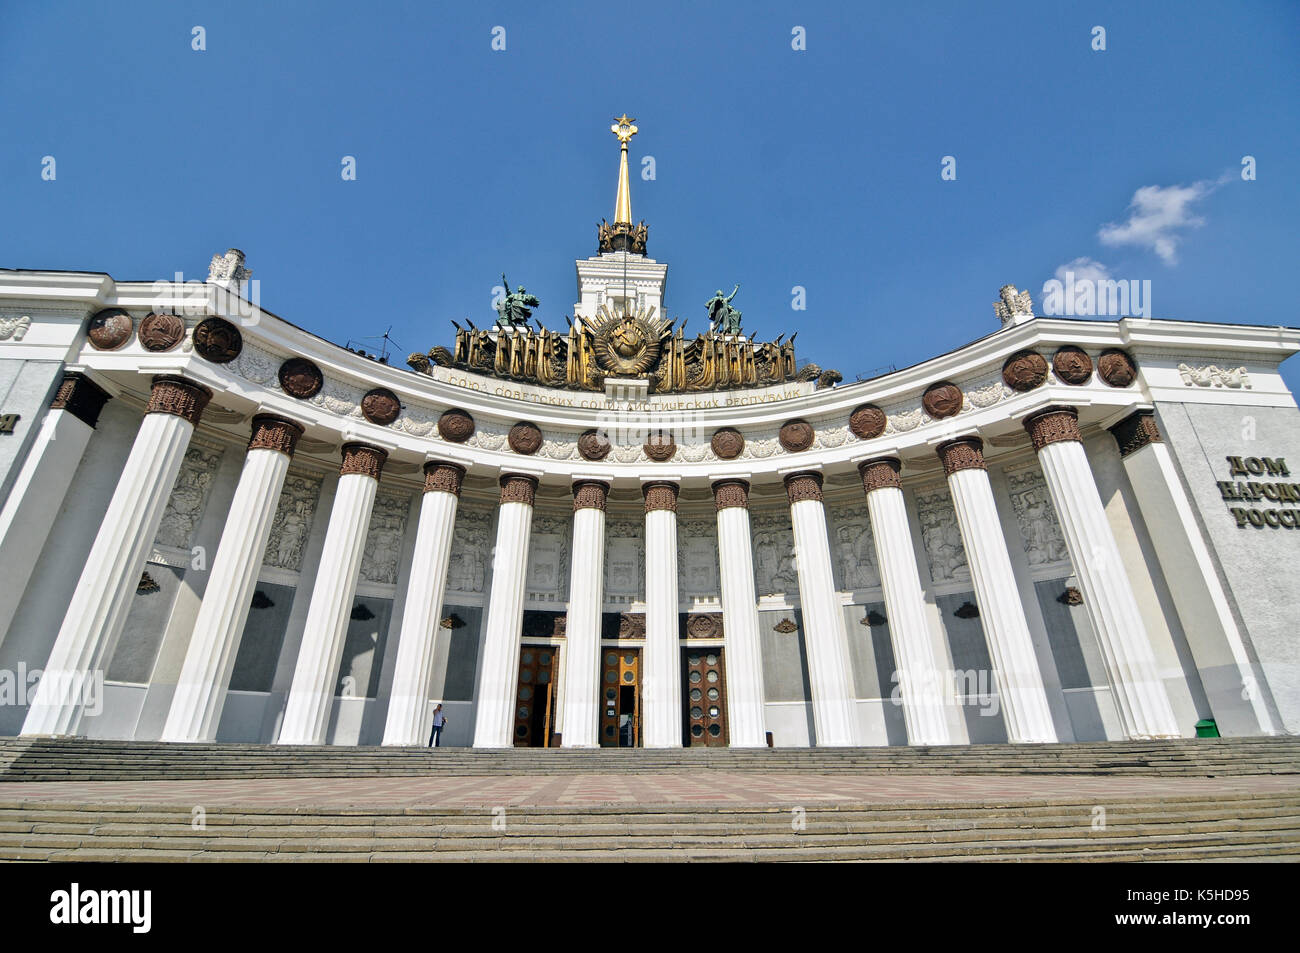 VDNH: Central Pavilion (House of Russian People - Dom Narodov Rossii), Moscow, Russia Stock Photo